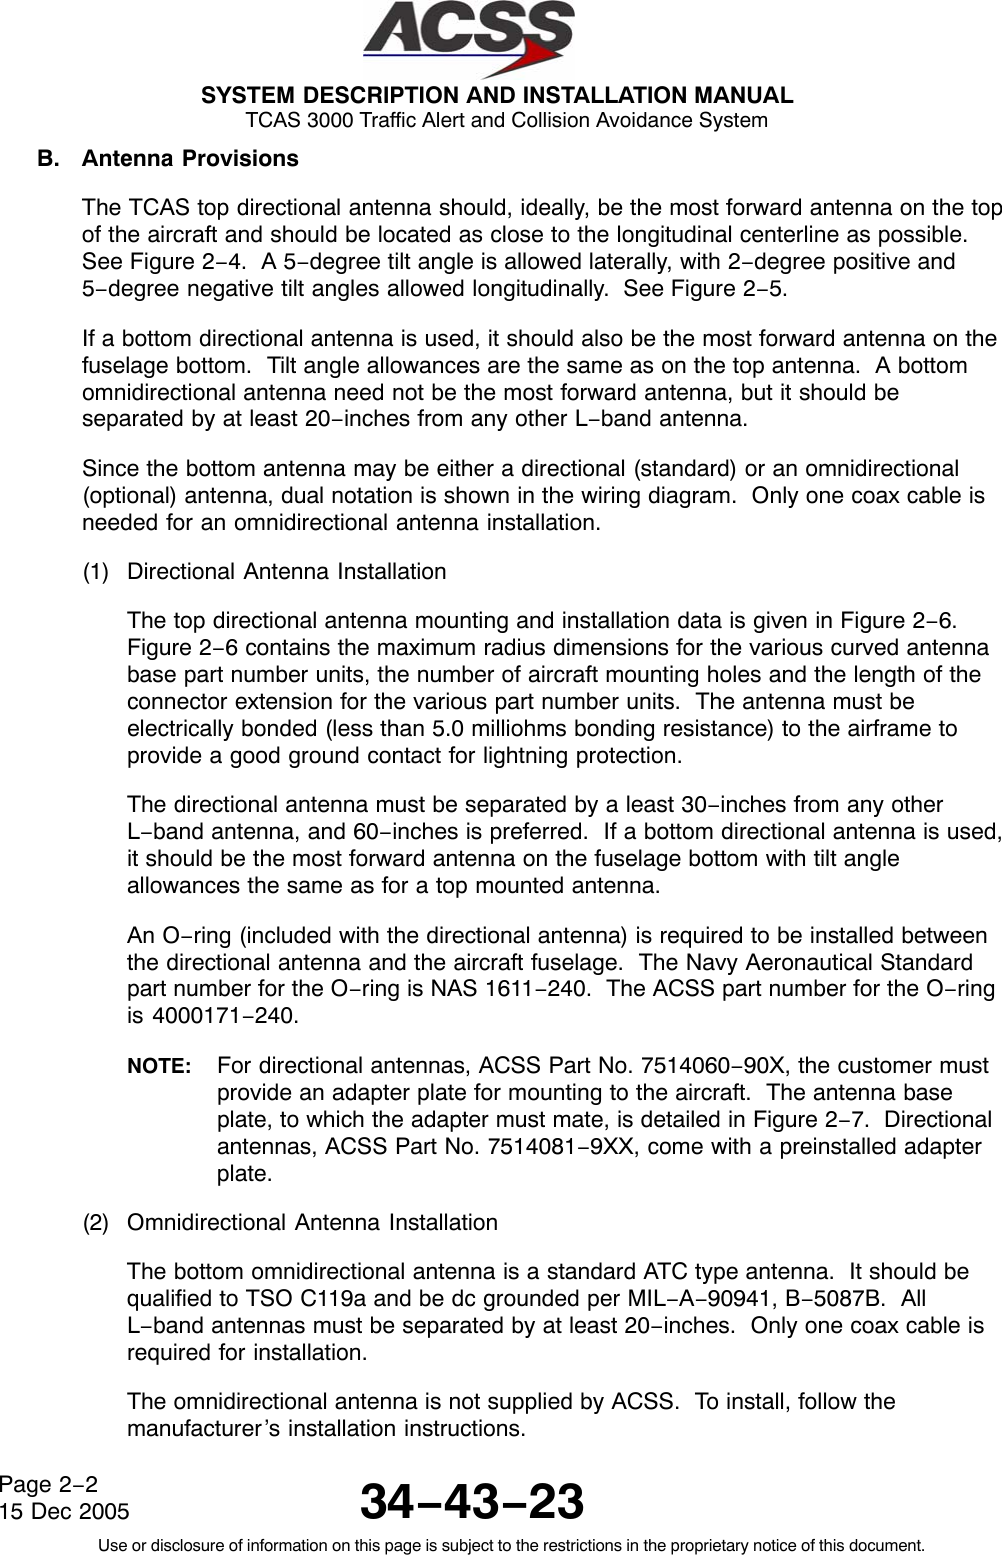  SYSTEM DESCRIPTION AND INSTALLATION MANUAL TCAS 3000 Traffic Alert and Collision Avoidance System34−43−23Use or disclosure of information on this page is subject to the restrictions in the proprietary notice of this document.Page 2−215 Dec 2005B. Antenna ProvisionsThe TCAS top directional antenna should, ideally, be the most forward antenna on the topof the aircraft and should be located as close to the longitudinal centerline as possible.See Figure 2−4.  A 5−degree tilt angle is allowed laterally, with 2−degree positive and5−degree negative tilt angles allowed longitudinally.  See Figure 2−5.If a bottom directional antenna is used, it should also be the most forward antenna on thefuselage bottom.  Tilt angle allowances are the same as on the top antenna.  A bottomomnidirectional antenna need not be the most forward antenna, but it should beseparated by at least 20−inches from any other L−band antenna.Since the bottom antenna may be either a directional (standard) or an omnidirectional(optional) antenna, dual notation is shown in the wiring diagram.  Only one coax cable isneeded for an omnidirectional antenna installation.(1) Directional Antenna InstallationThe top directional antenna mounting and installation data is given in Figure 2−6.Figure 2−6 contains the maximum radius dimensions for the various curved antennabase part number units, the number of aircraft mounting holes and the length of theconnector extension for the various part number units.  The antenna must beelectrically bonded (less than 5.0 milliohms bonding resistance) to the airframe toprovide a good ground contact for lightning protection.The directional antenna must be separated by a least 30−inches from any otherL−band antenna, and 60−inches is preferred.  If a bottom directional antenna is used,it should be the most forward antenna on the fuselage bottom with tilt angleallowances the same as for a top mounted antenna.An O−ring (included with the directional antenna) is required to be installed betweenthe directional antenna and the aircraft fuselage.  The Navy Aeronautical Standardpart number for the O−ring is NAS 1611−240.  The ACSS part number for the O−ringis 4000171−240.NOTE: For directional antennas, ACSS Part No. 7514060−90X, the customer mustprovide an adapter plate for mounting to the aircraft.  The antenna baseplate, to which the adapter must mate, is detailed in Figure 2−7.  Directionalantennas, ACSS Part No. 7514081−9XX, come with a preinstalled adapterplate.(2) Omnidirectional Antenna InstallationThe bottom omnidirectional antenna is a standard ATC type antenna.  It should bequalified to TSO C119a and be dc grounded per MIL−A−90941, B−5087B.  AllL−band antennas must be separated by at least 20−inches.  Only one coax cable isrequired for installation.The omnidirectional antenna is not supplied by ACSS.  To install, follow themanufacturer’s installation instructions.